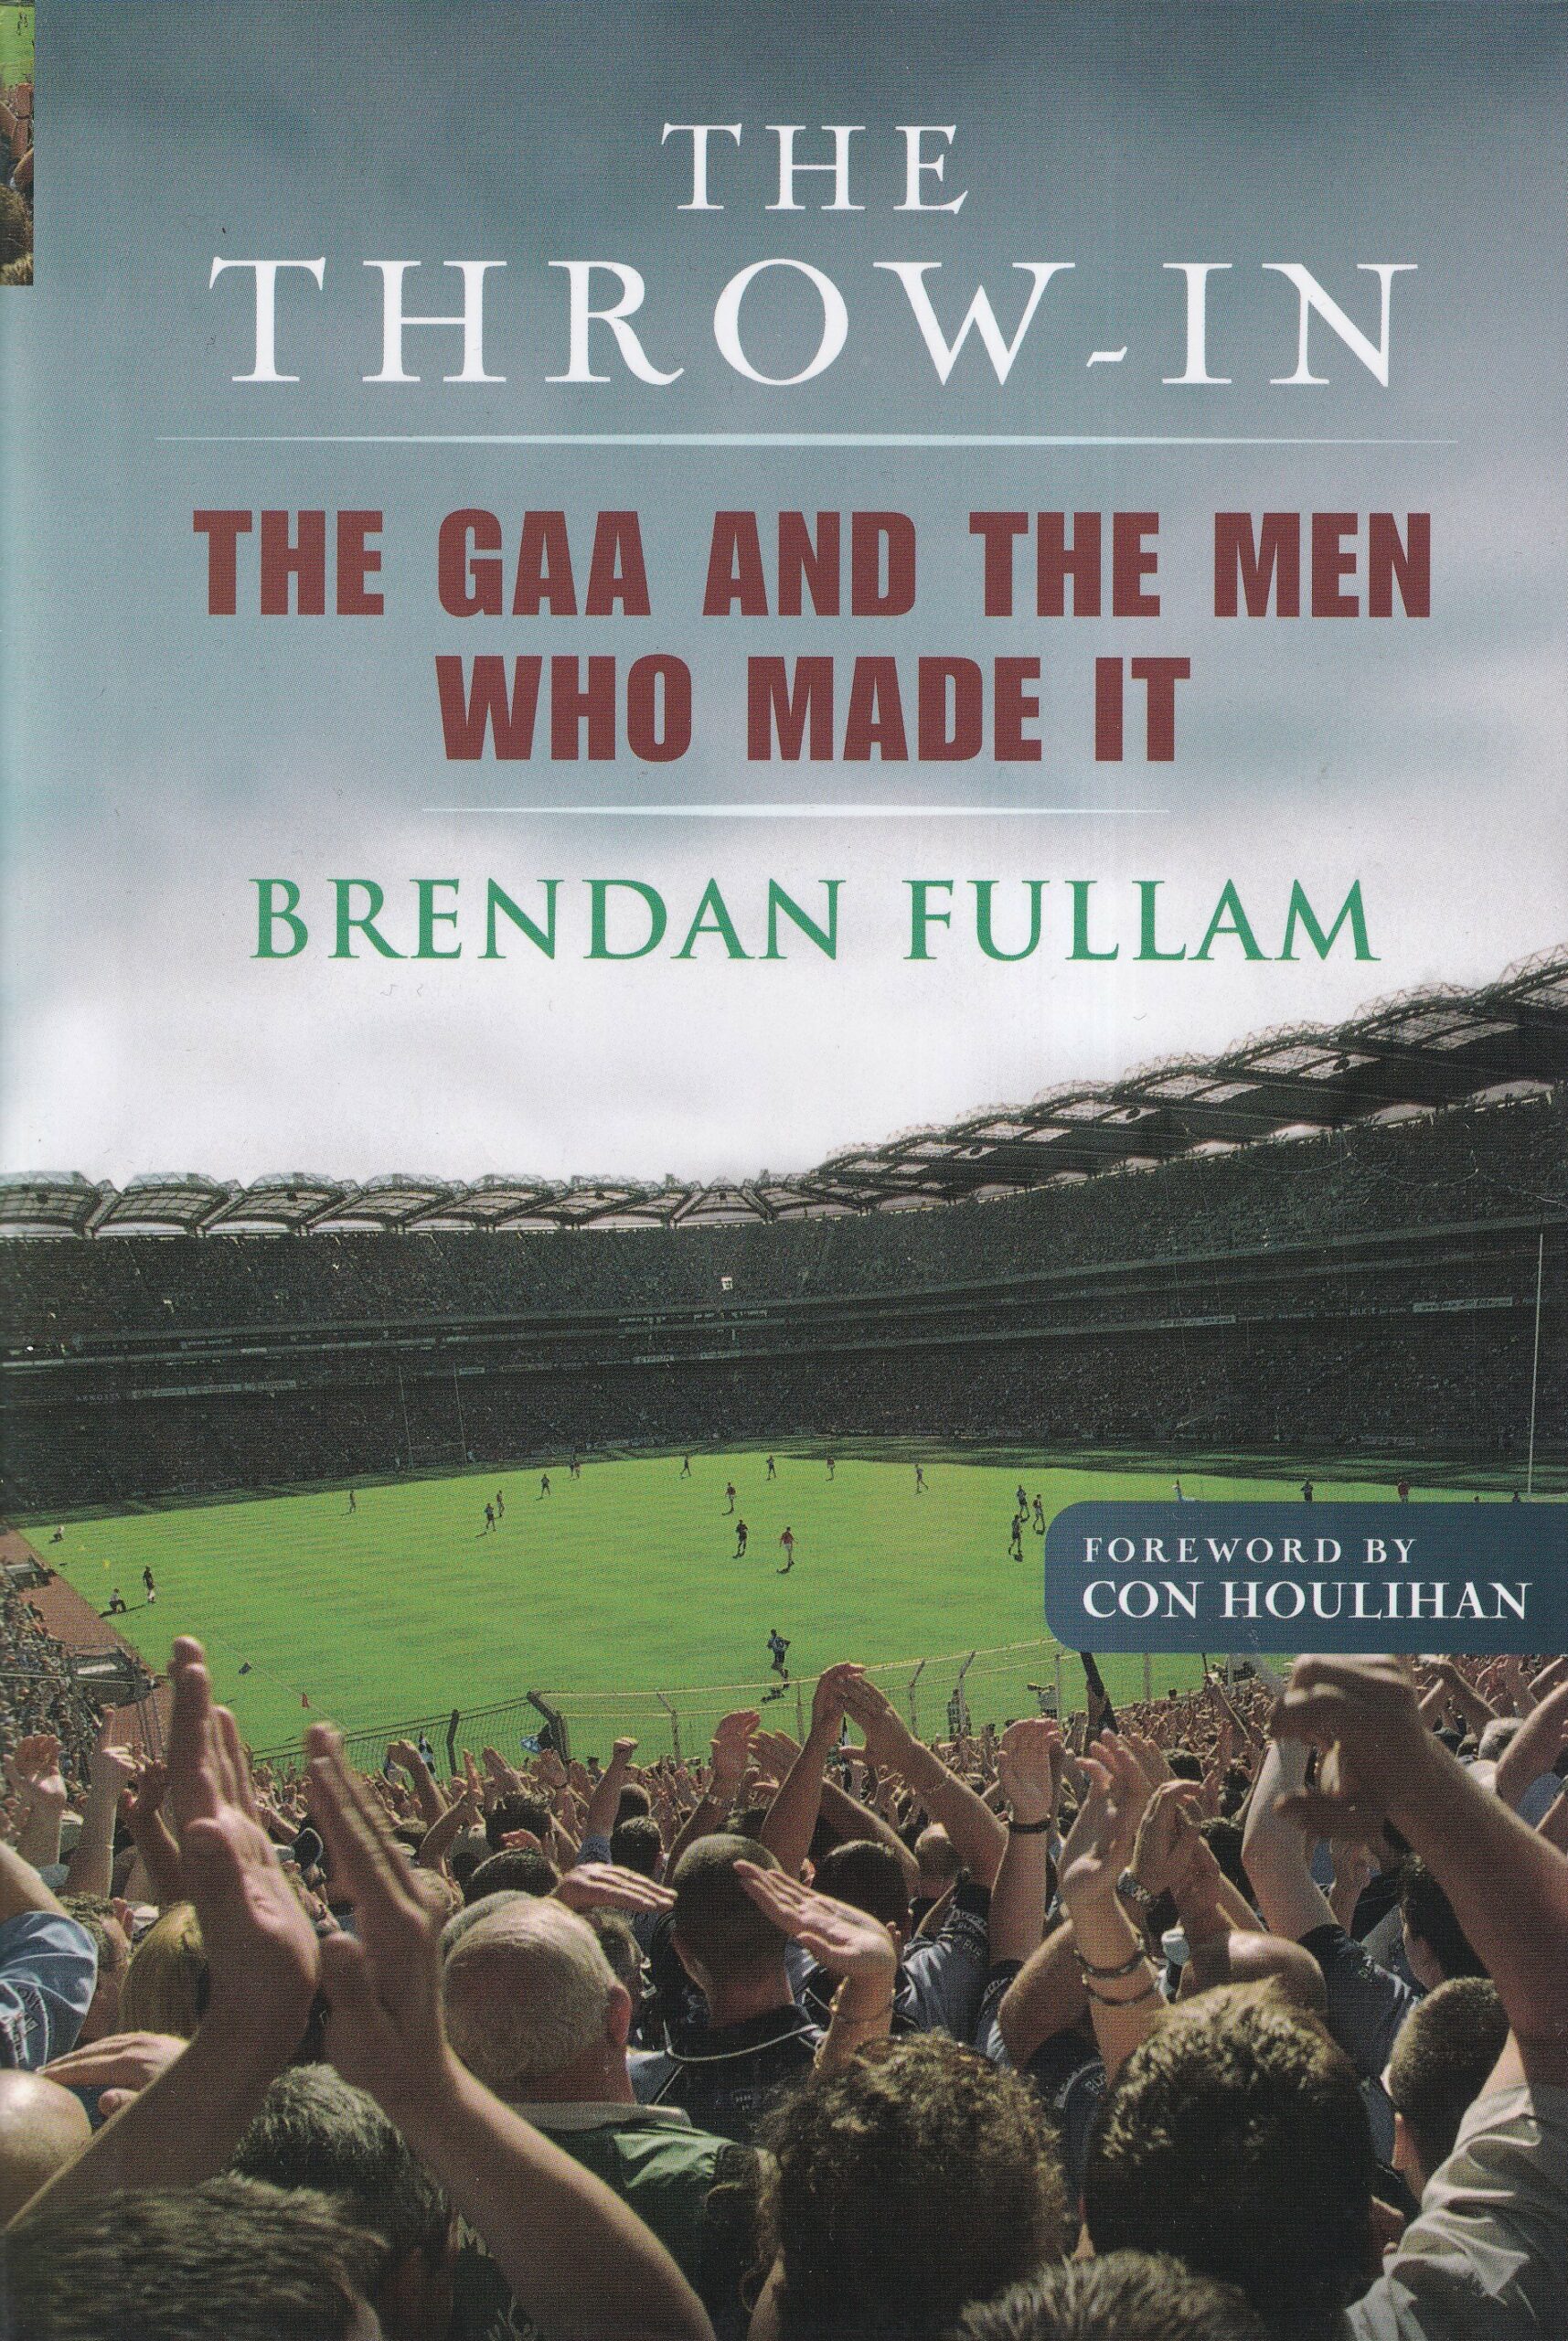 The Throw-In: The GAA and the Men Who Made It by Brendan Fullam